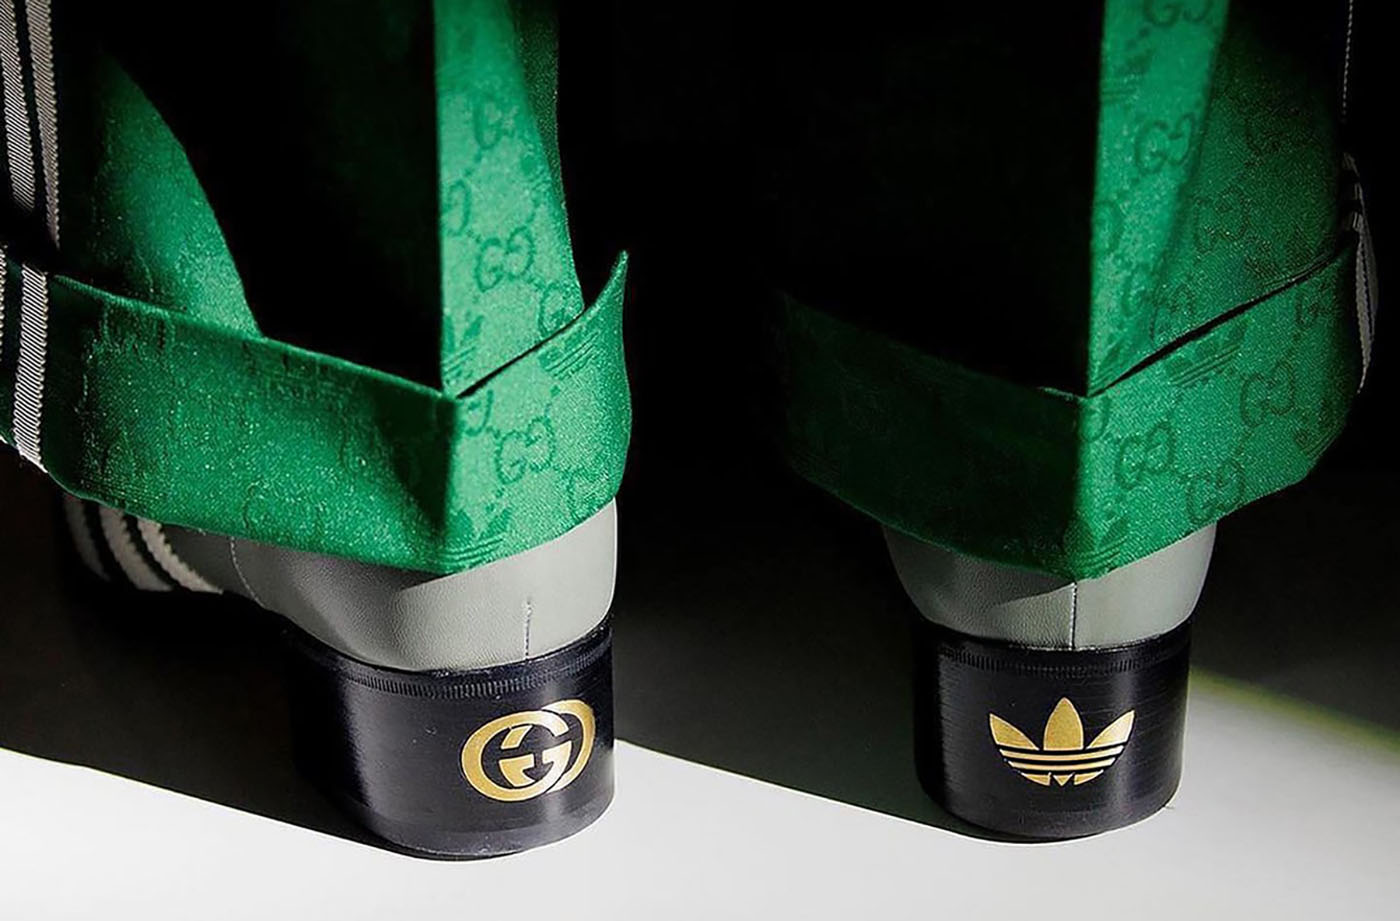 From sneakers to bags, the adidas x Gucci collection drops today